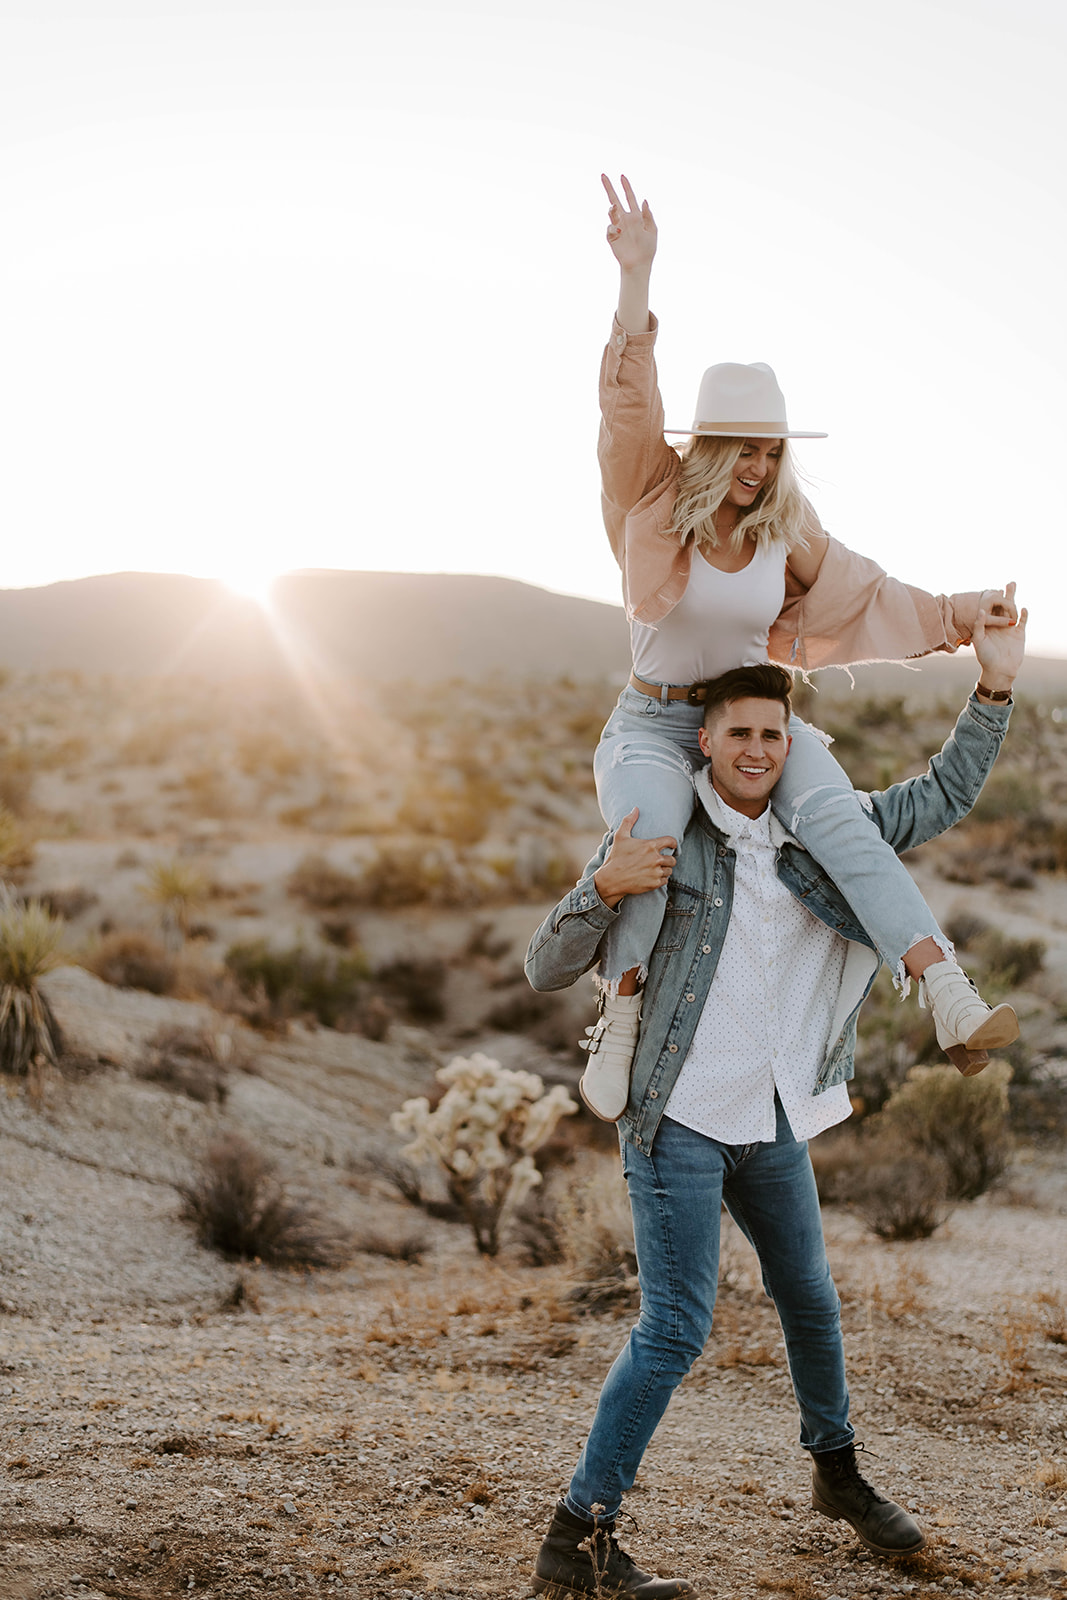 outfit ideas for a couple's session